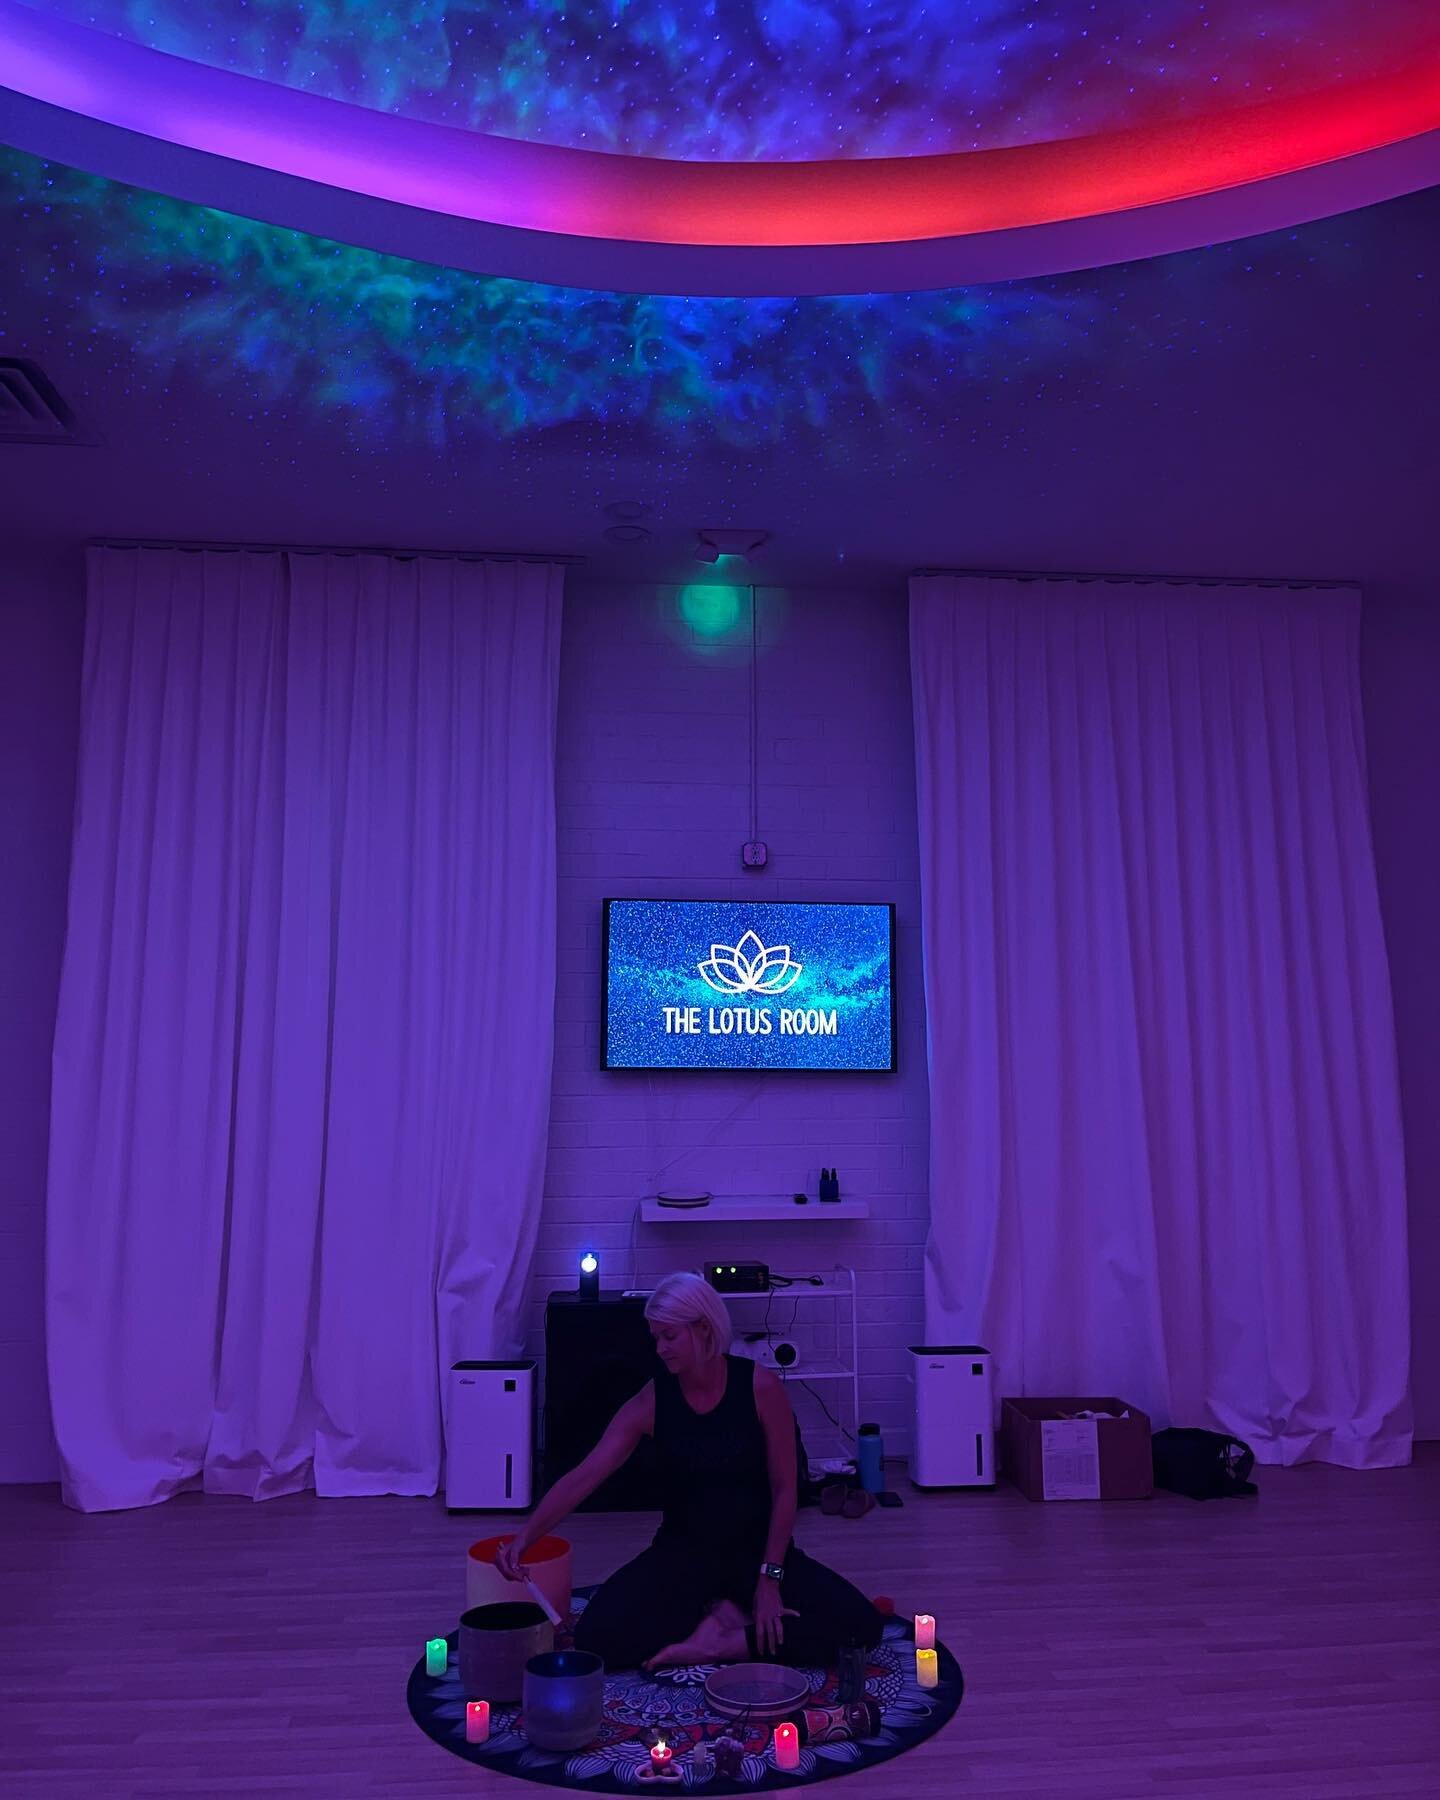 The Perfect Sound healing set up doesn&rsquo;t exi- 👀

But seriously though, this set up 🤩 

Join us for a Sound Healing experience like no other - every Friday &amp; Sunday ✨
&bull;
&bull;
&bull;
&bull;
&bull;
#GLOW #raleigh #soundhealing